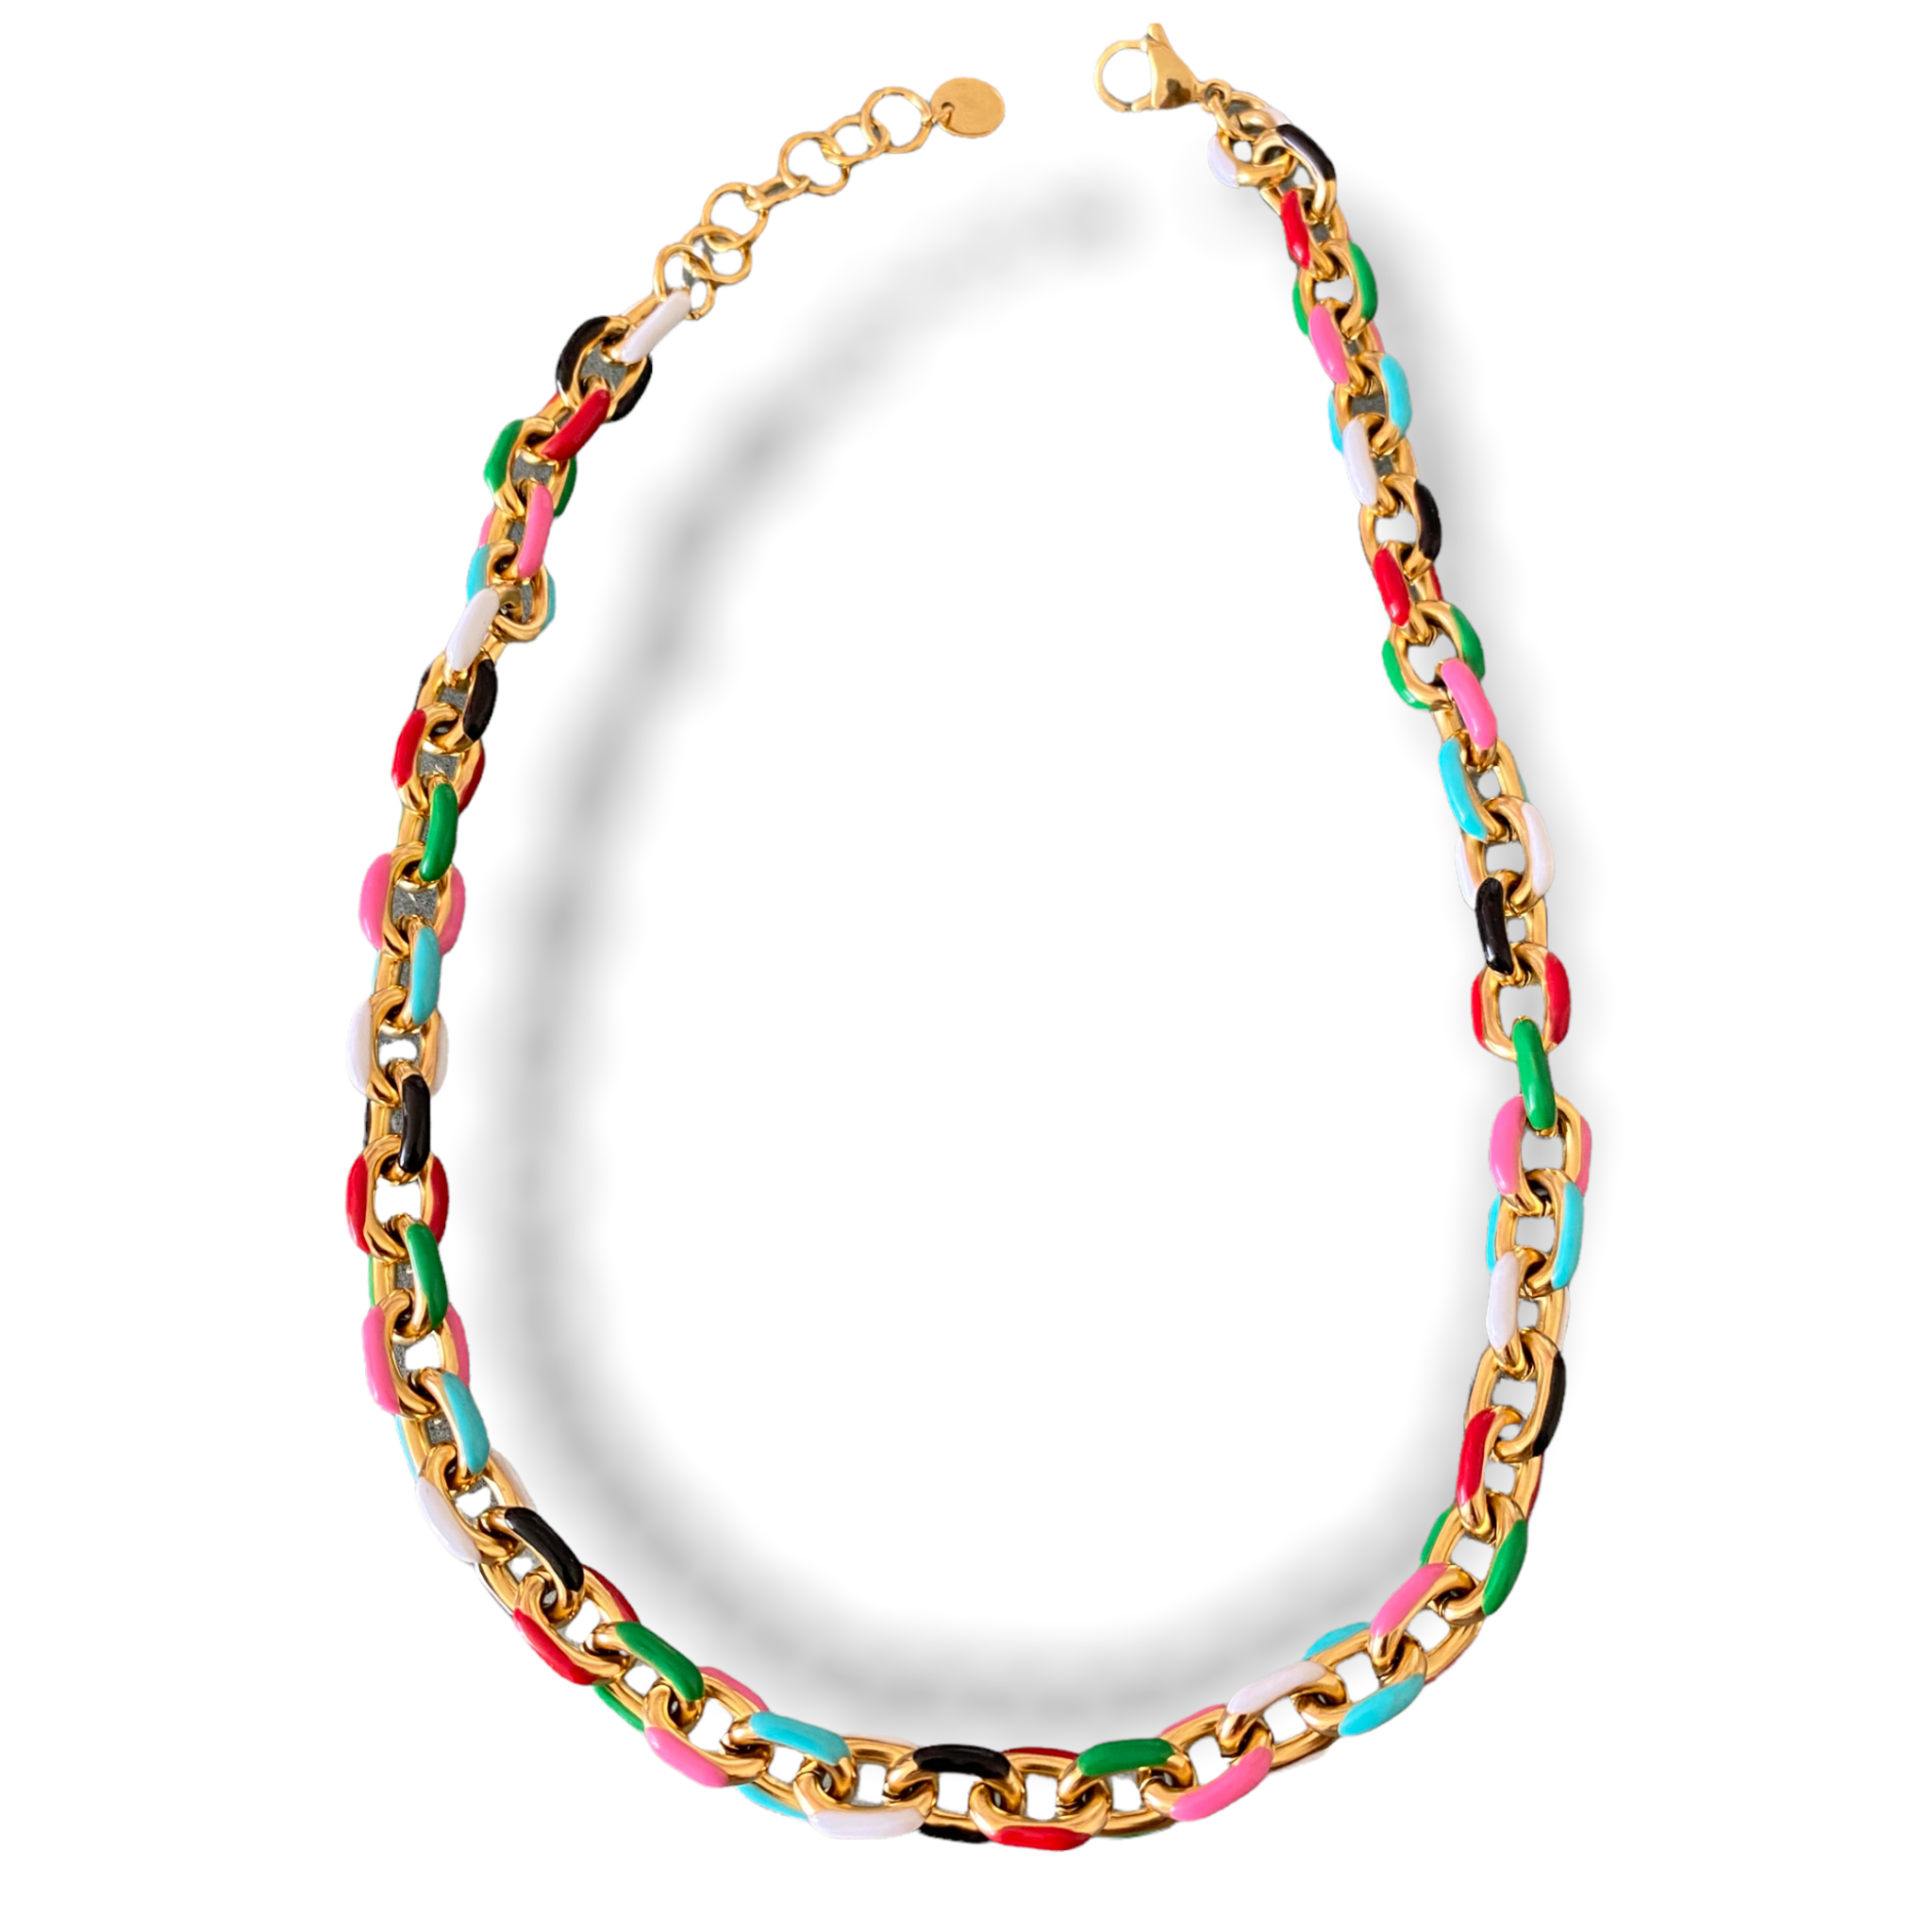 Rainbow link chain necklace